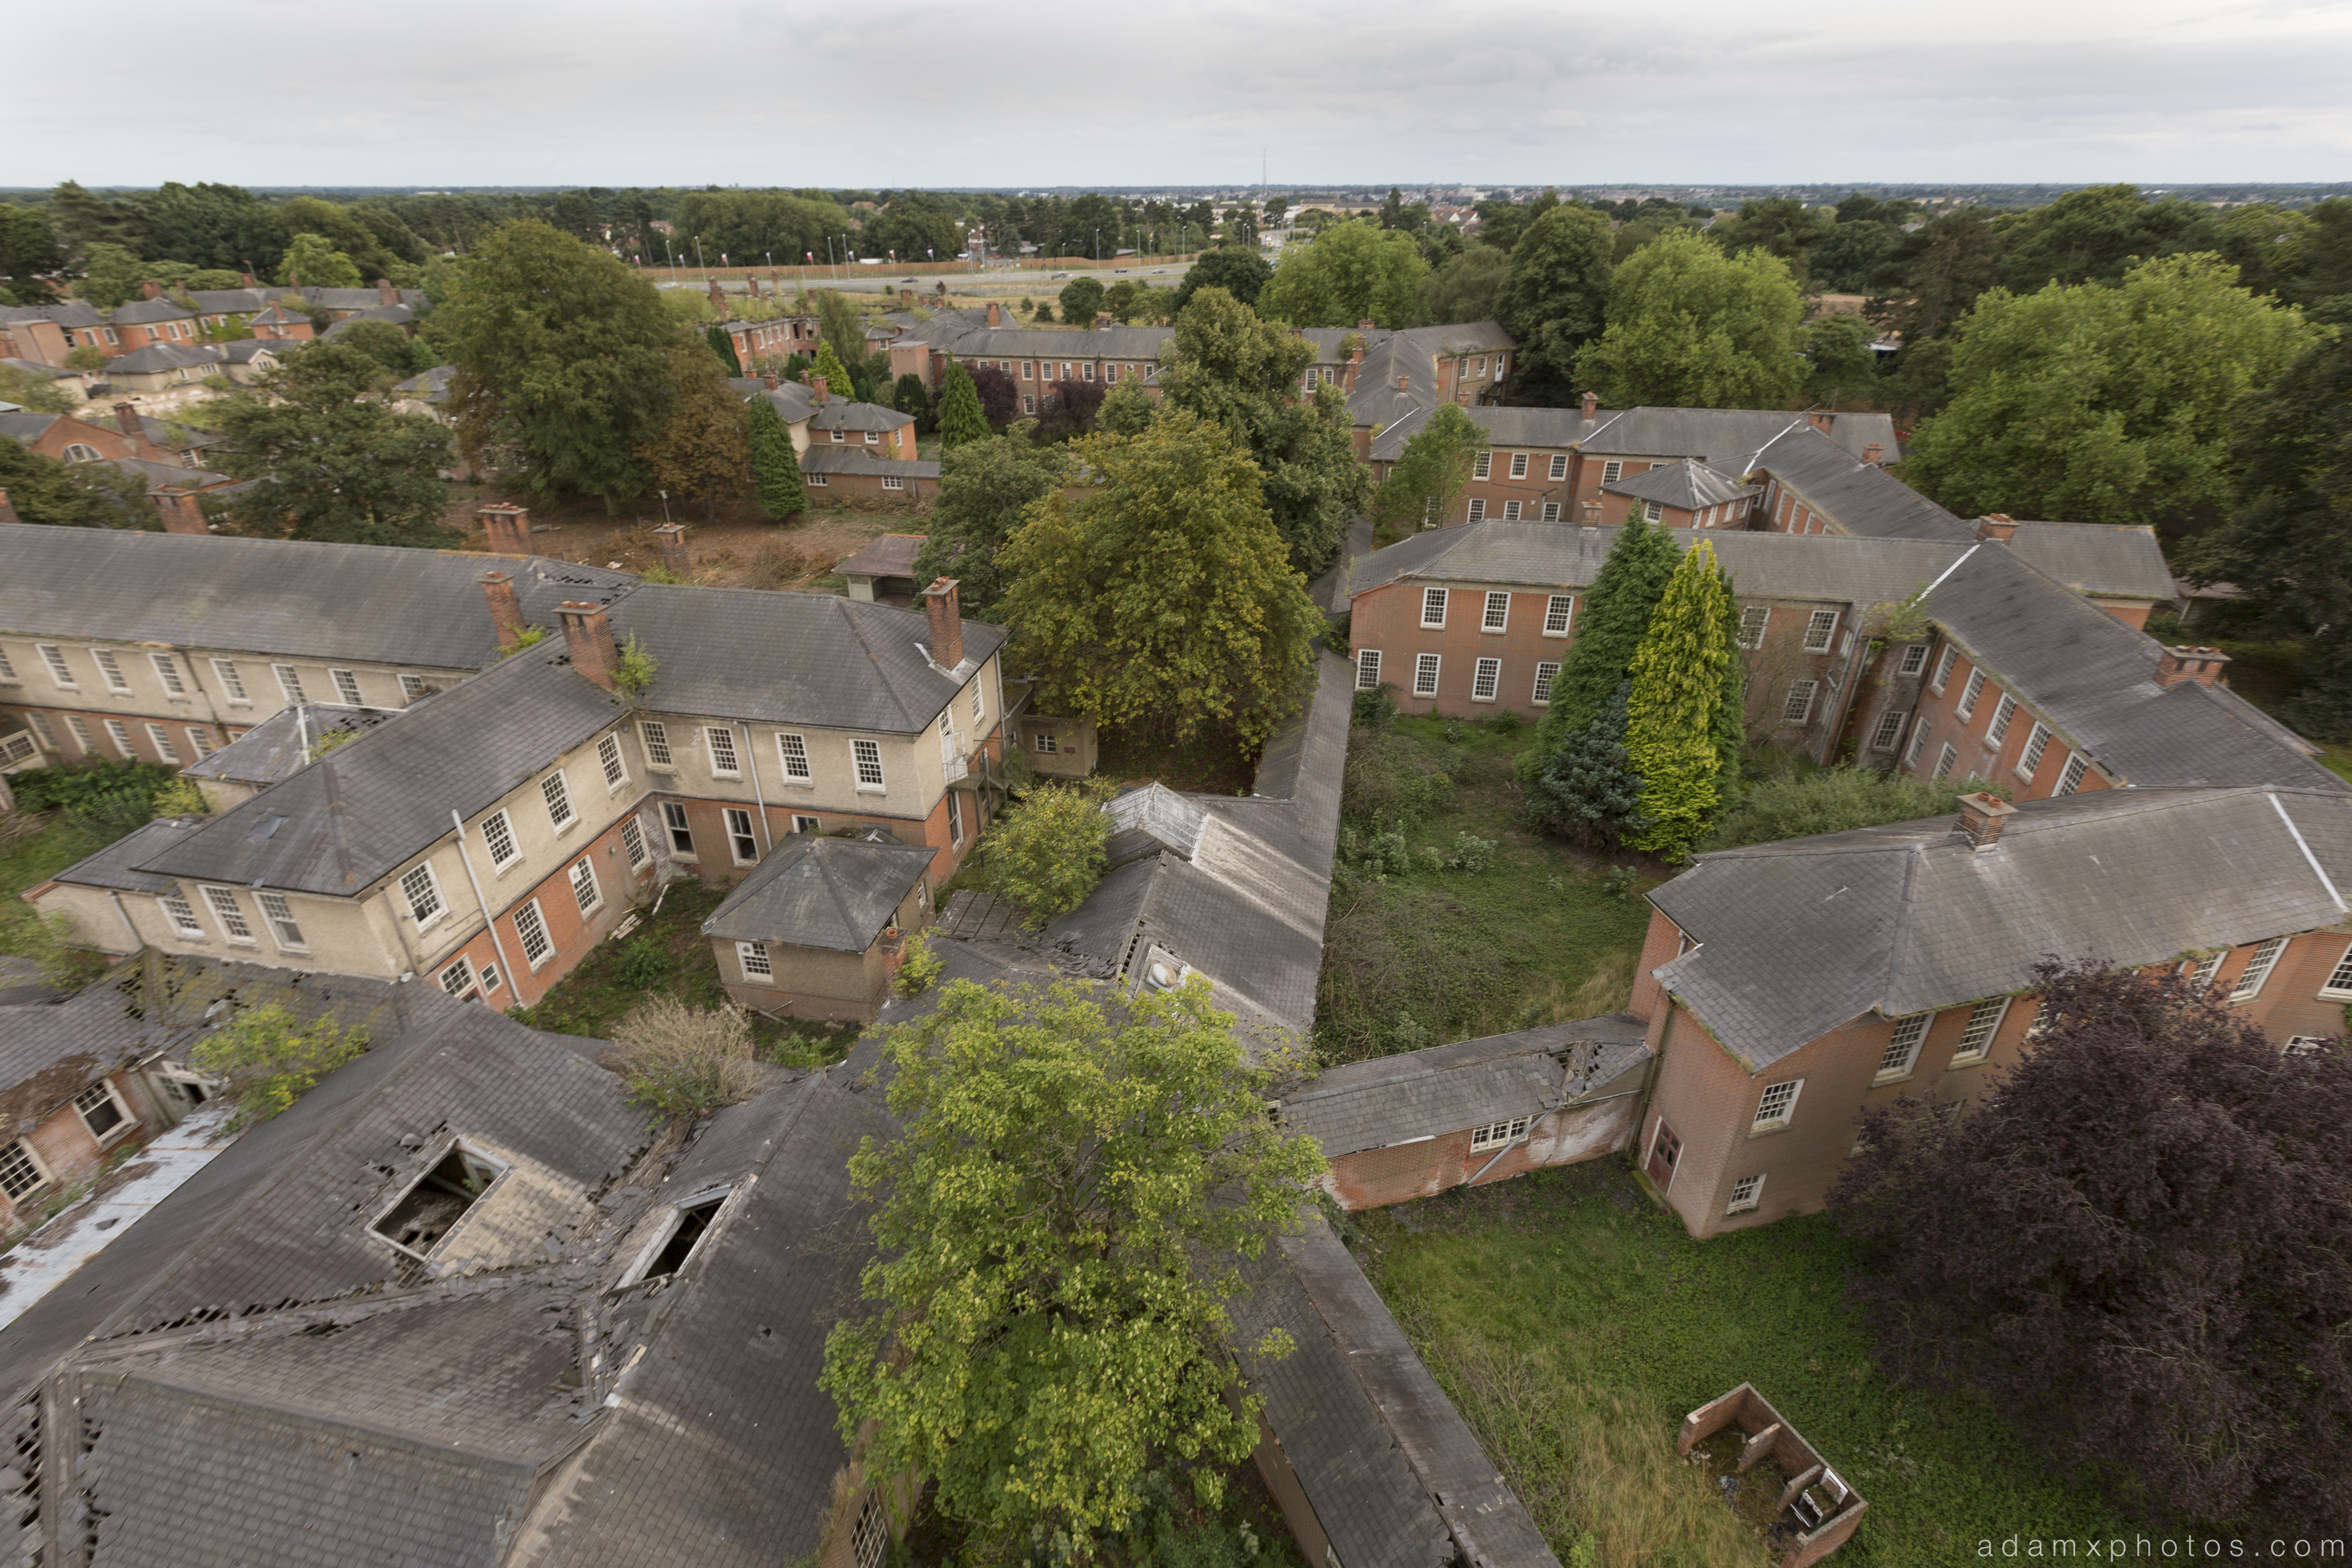 Wards and corridors view from the water tower high Severalls Mental Asylum Hospital Sevs Urbex Adam X Urban Exploration Access 2016 Abandoned decay lost forgotten derelict location creepy haunting eerie